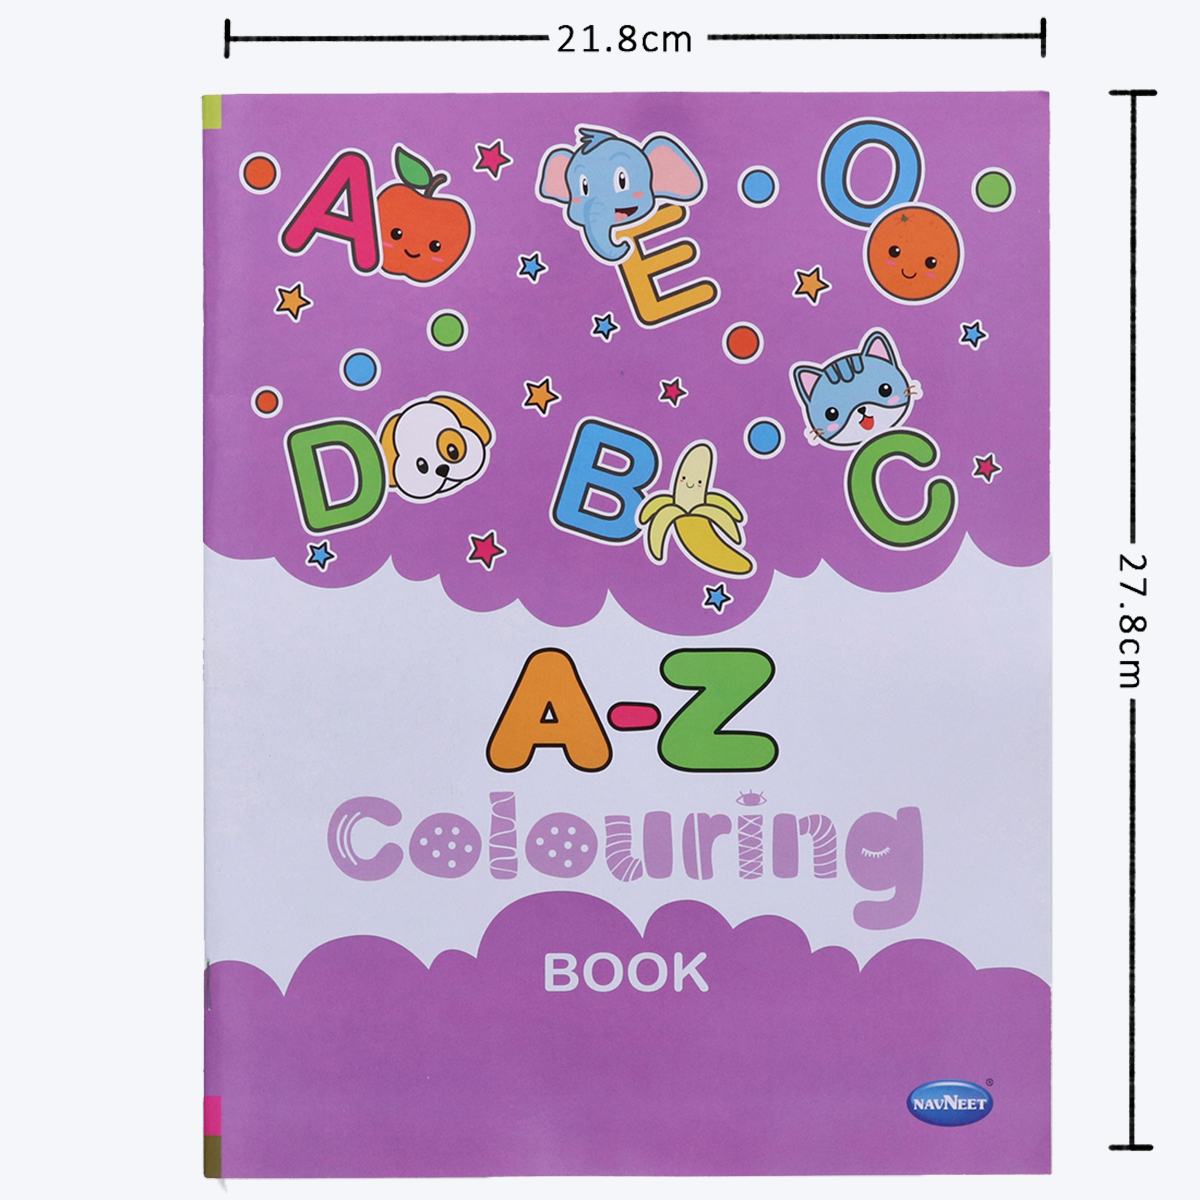 Navneet Colouring book series for kids , theme based series set of 3 books - colouring Book- Play time , pets, A-Z Colouring Book.